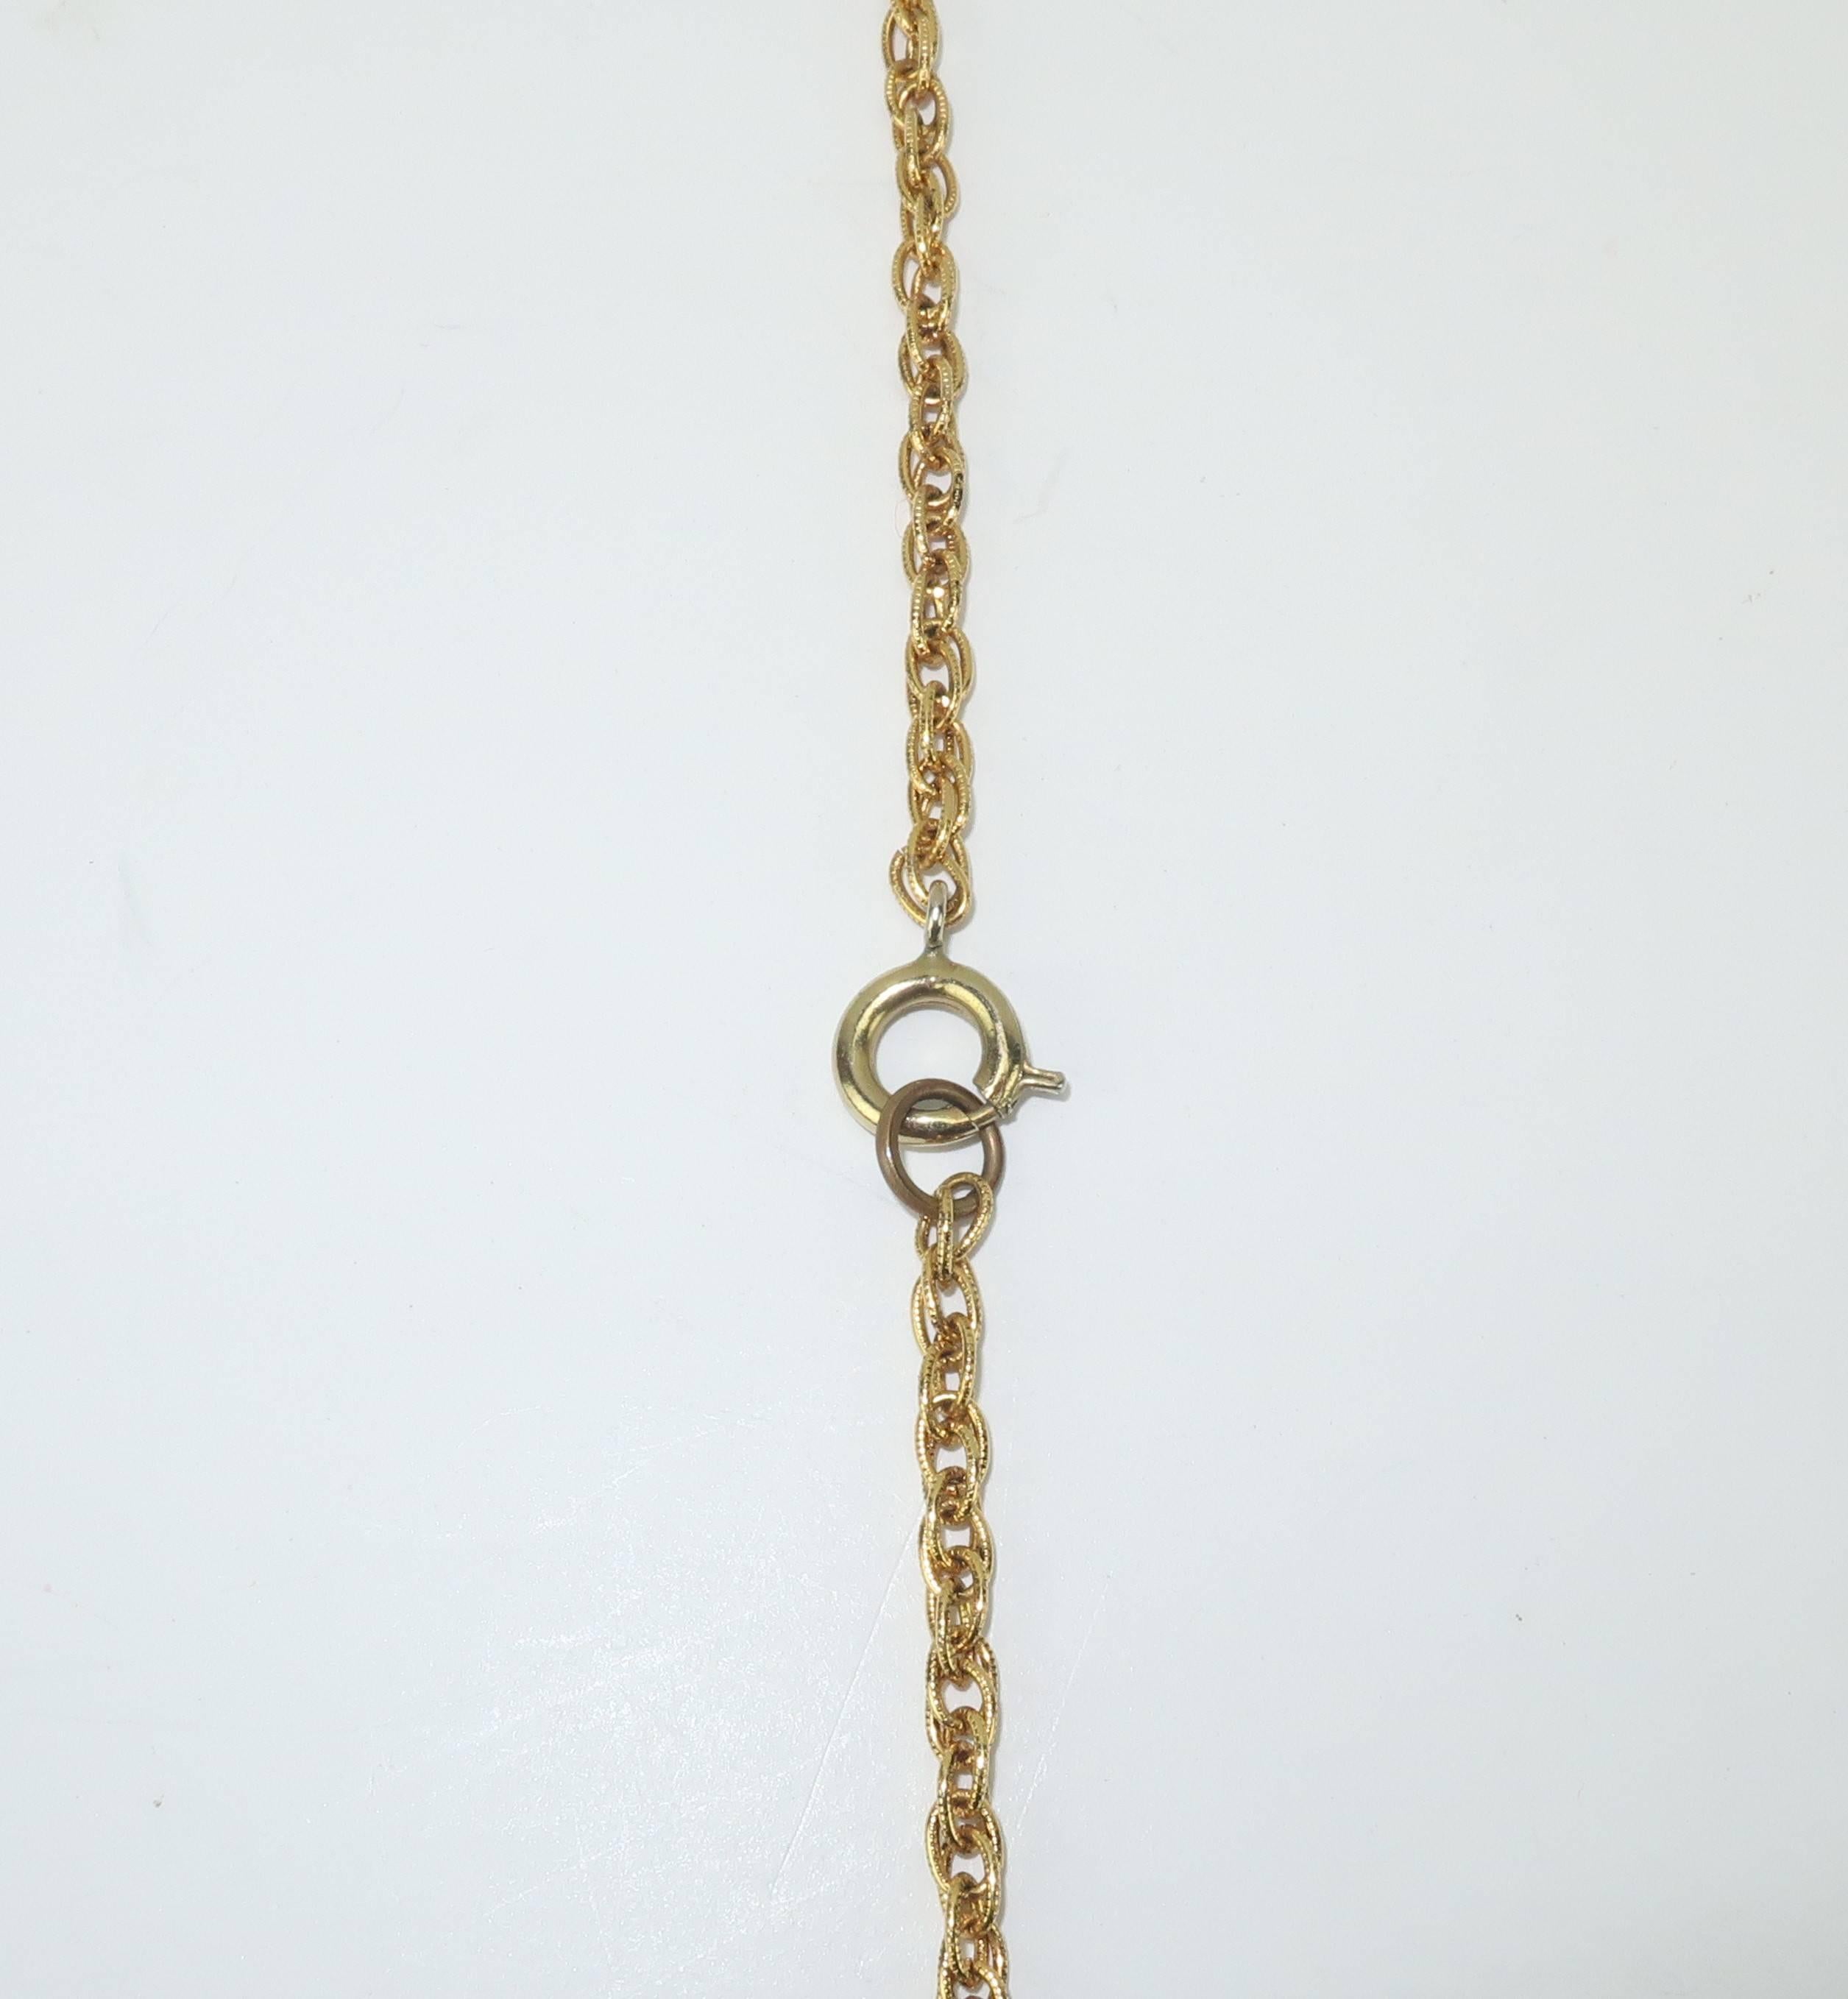 Women's C.1970 Mr. We Articulated Man Pendant Necklace